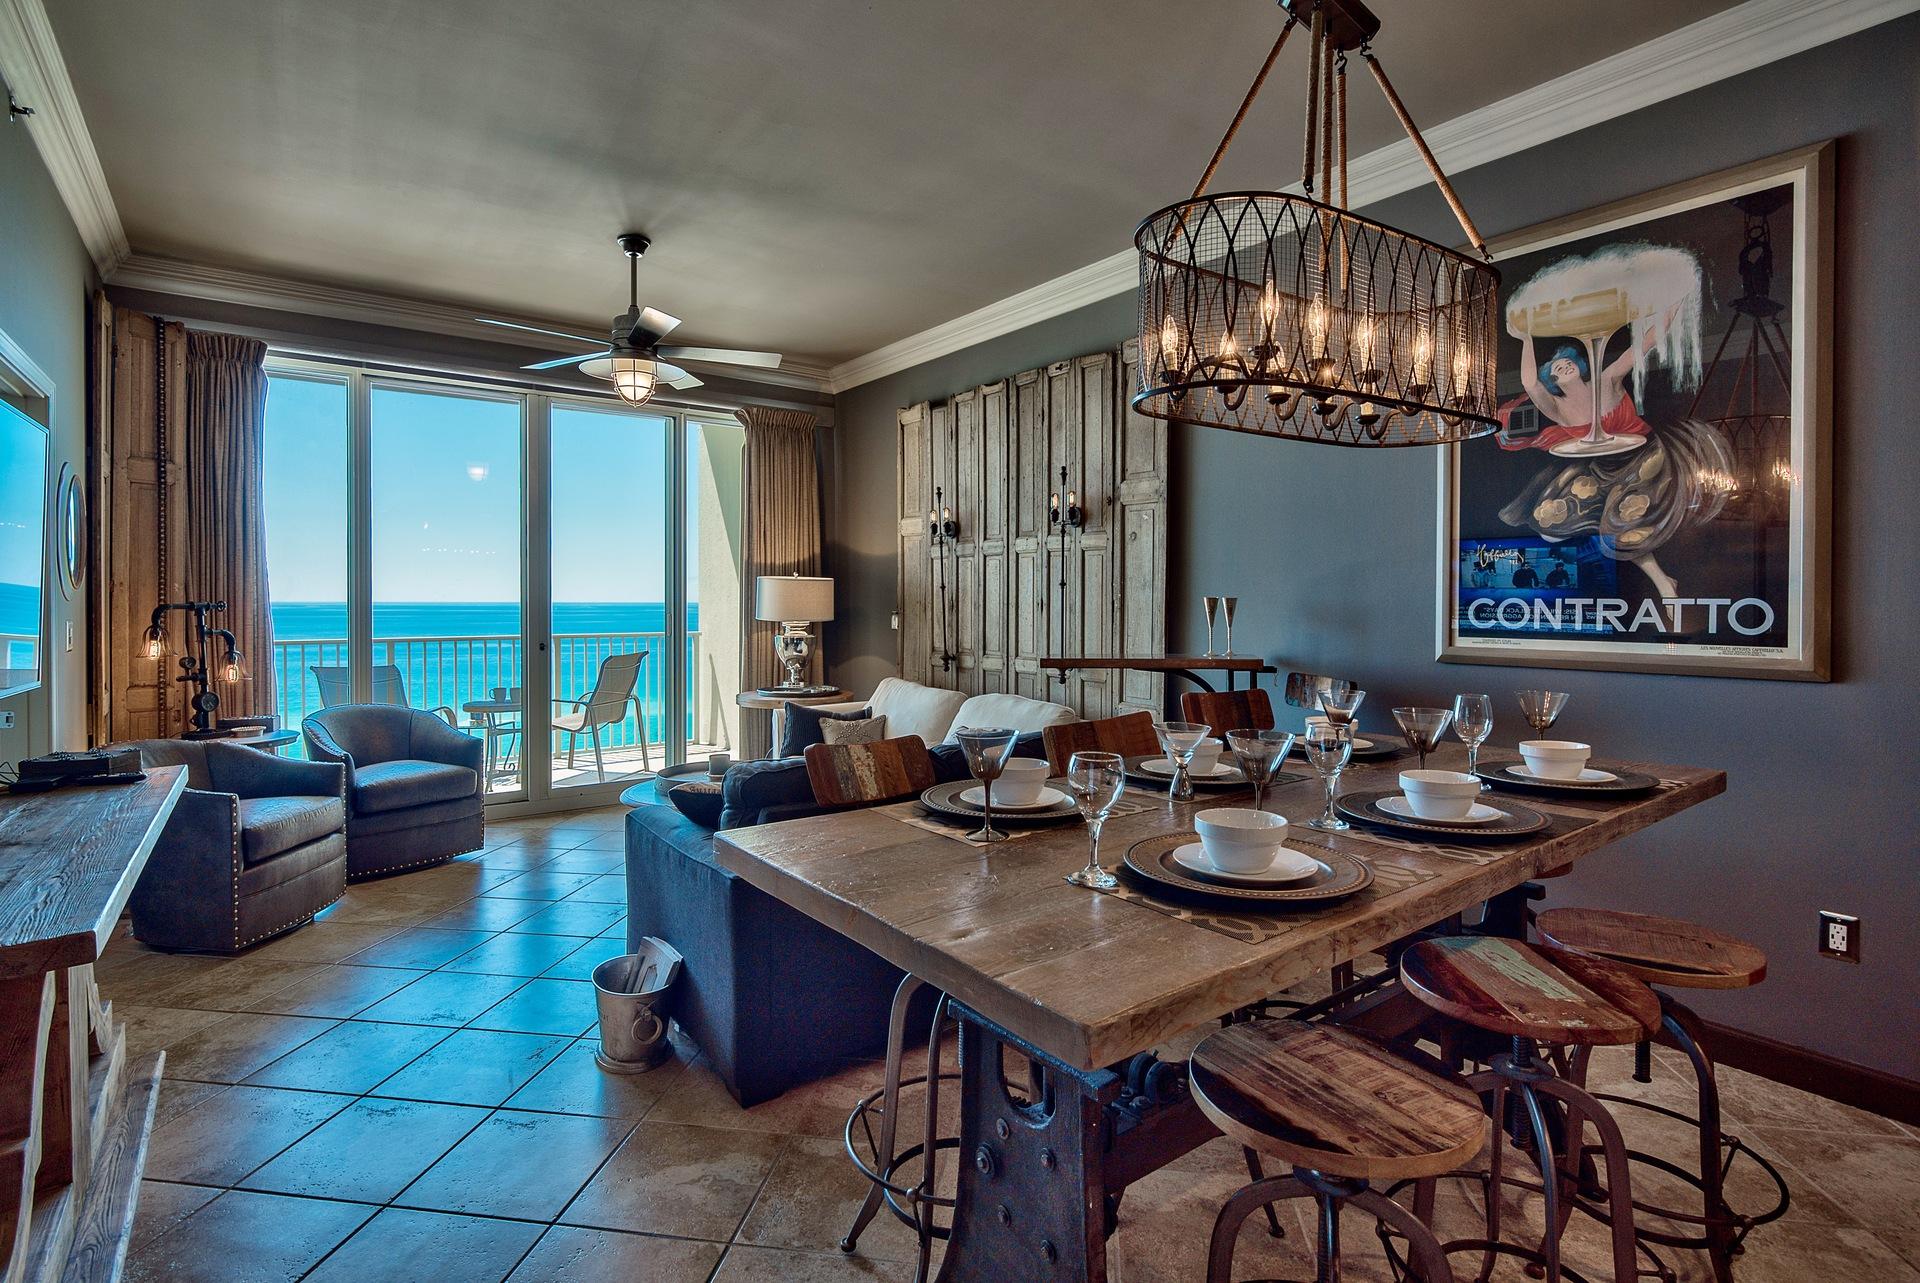 Open concept design with a view of the Gulf 